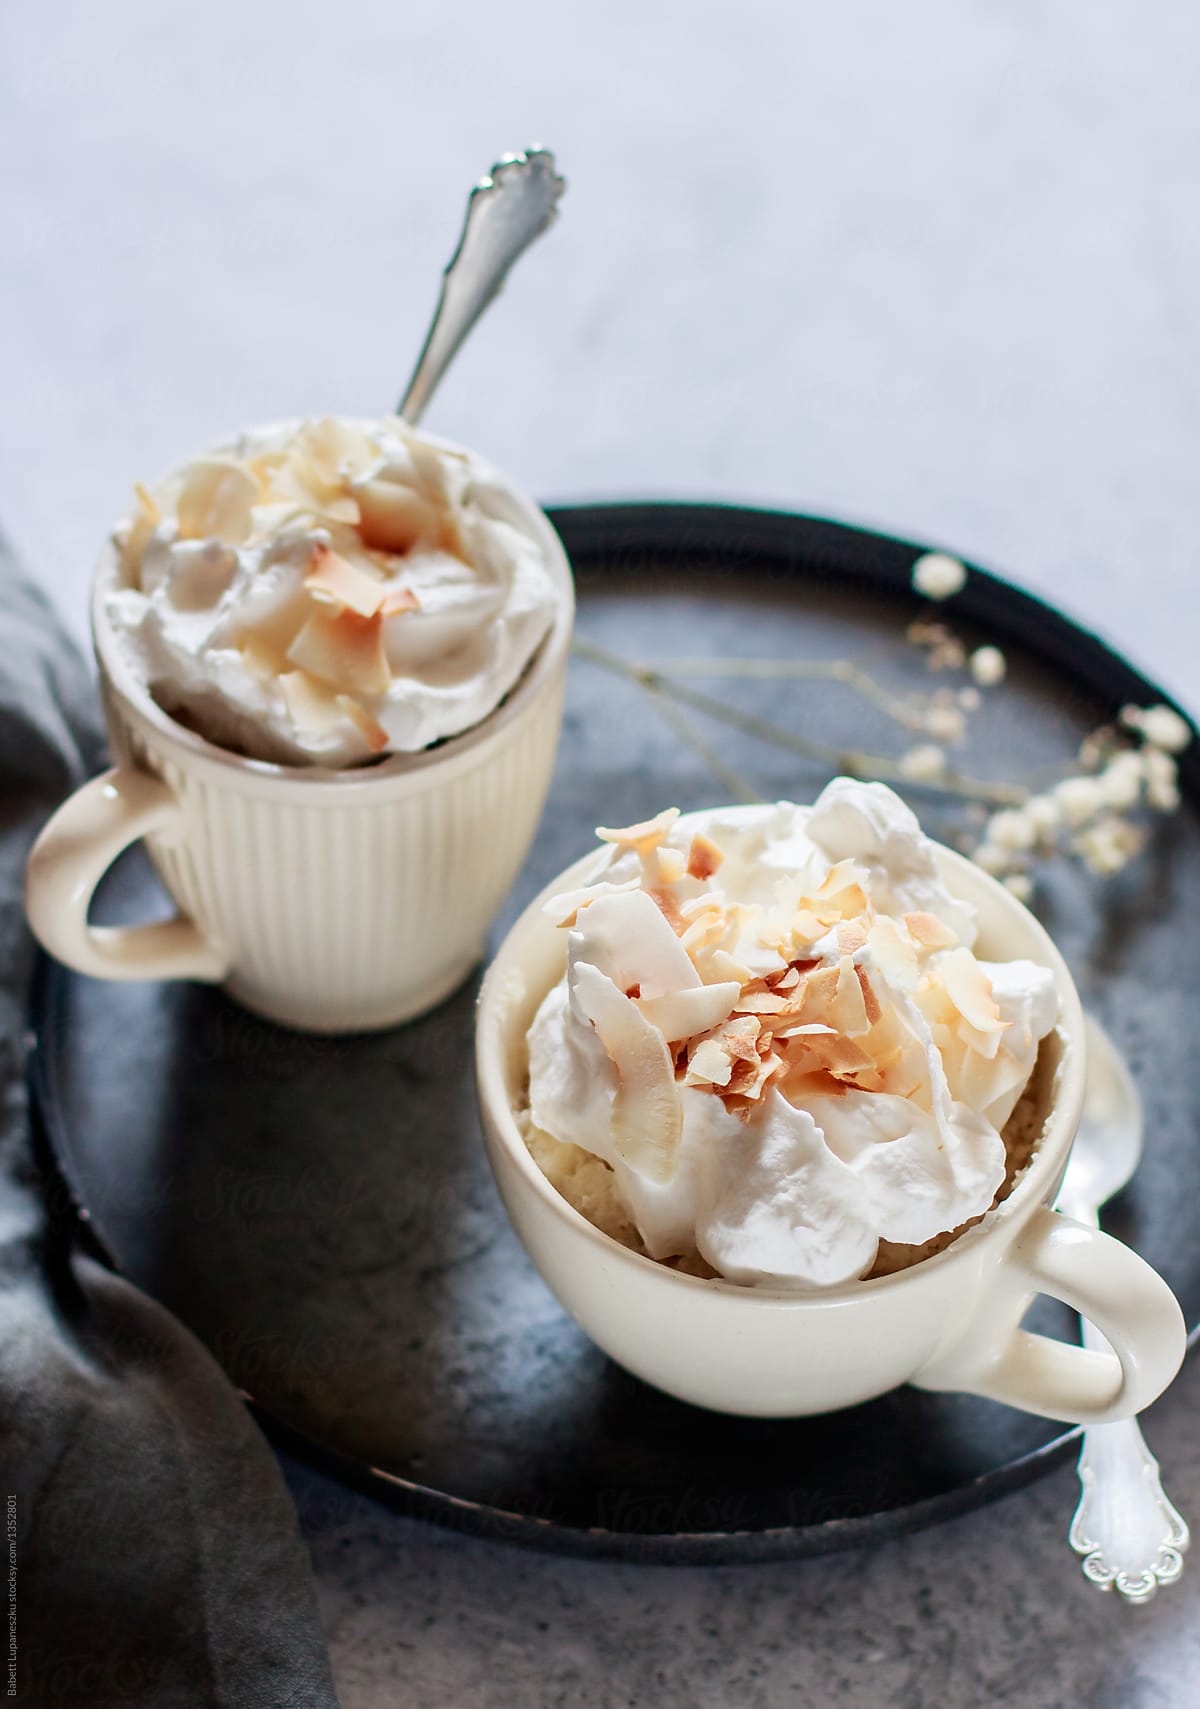 Coconut cake in a cup